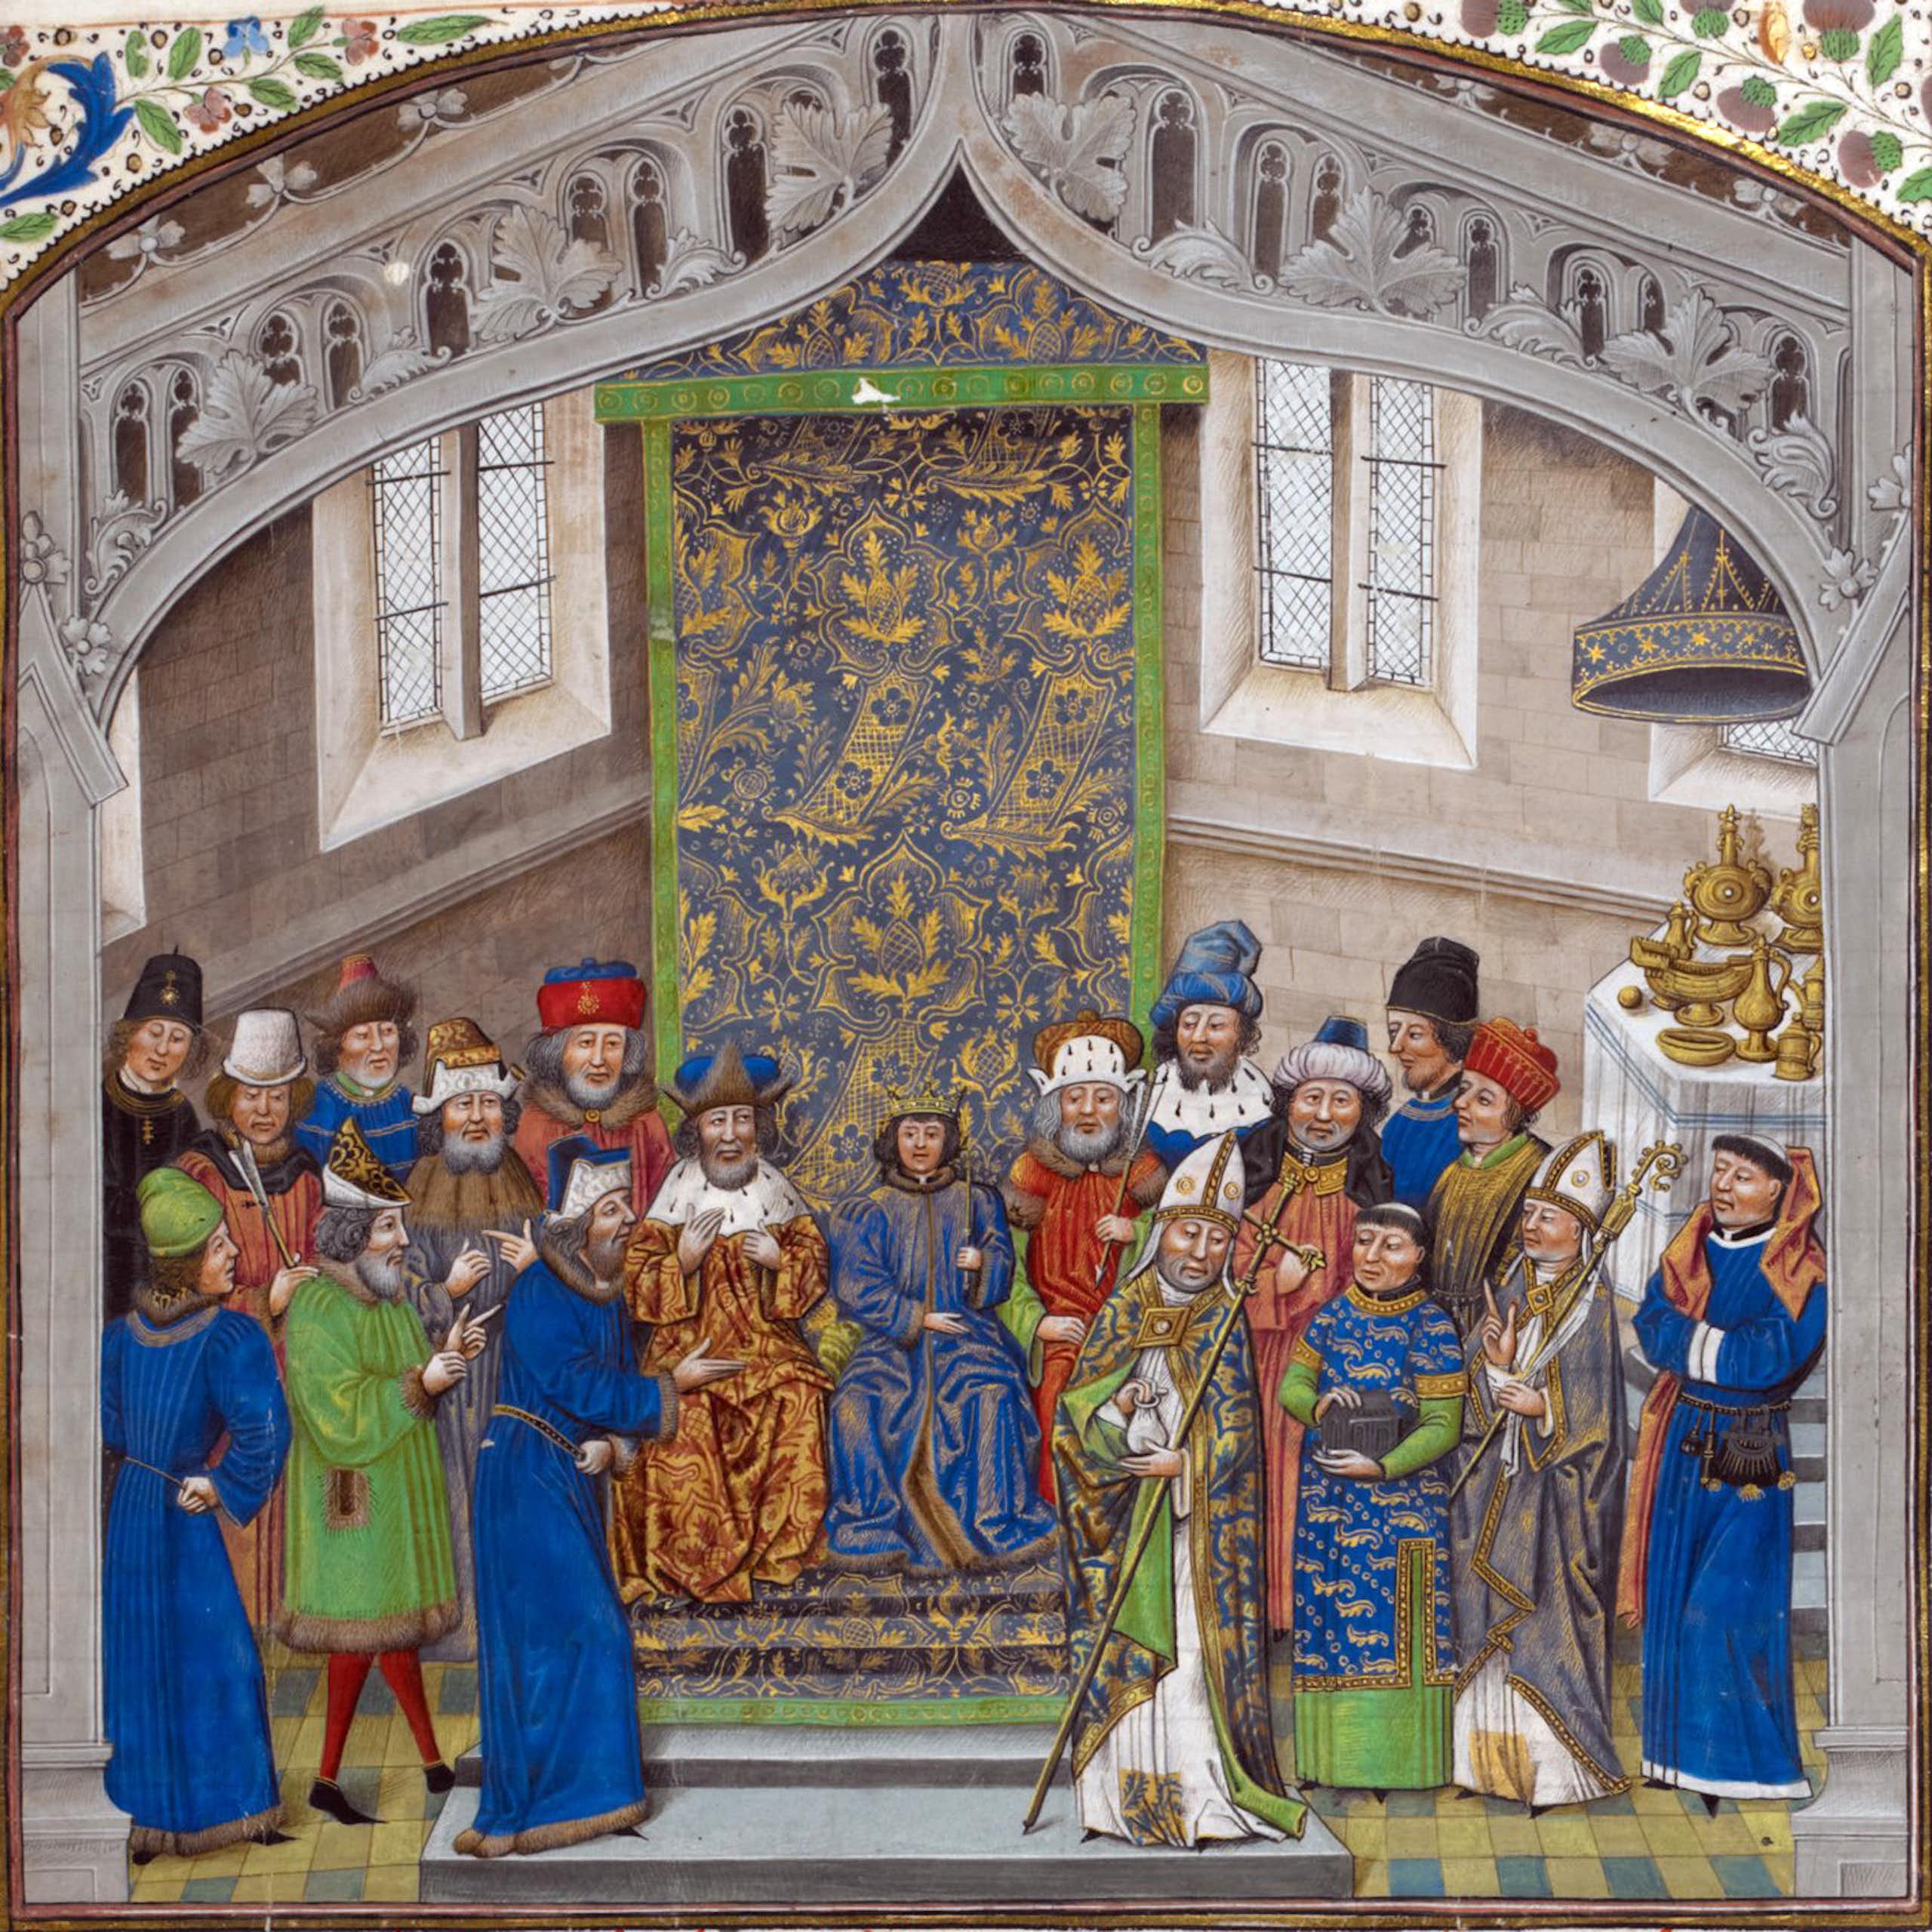 A brightly colored medieval illustration of several men on a throne as others mill around on the sides.